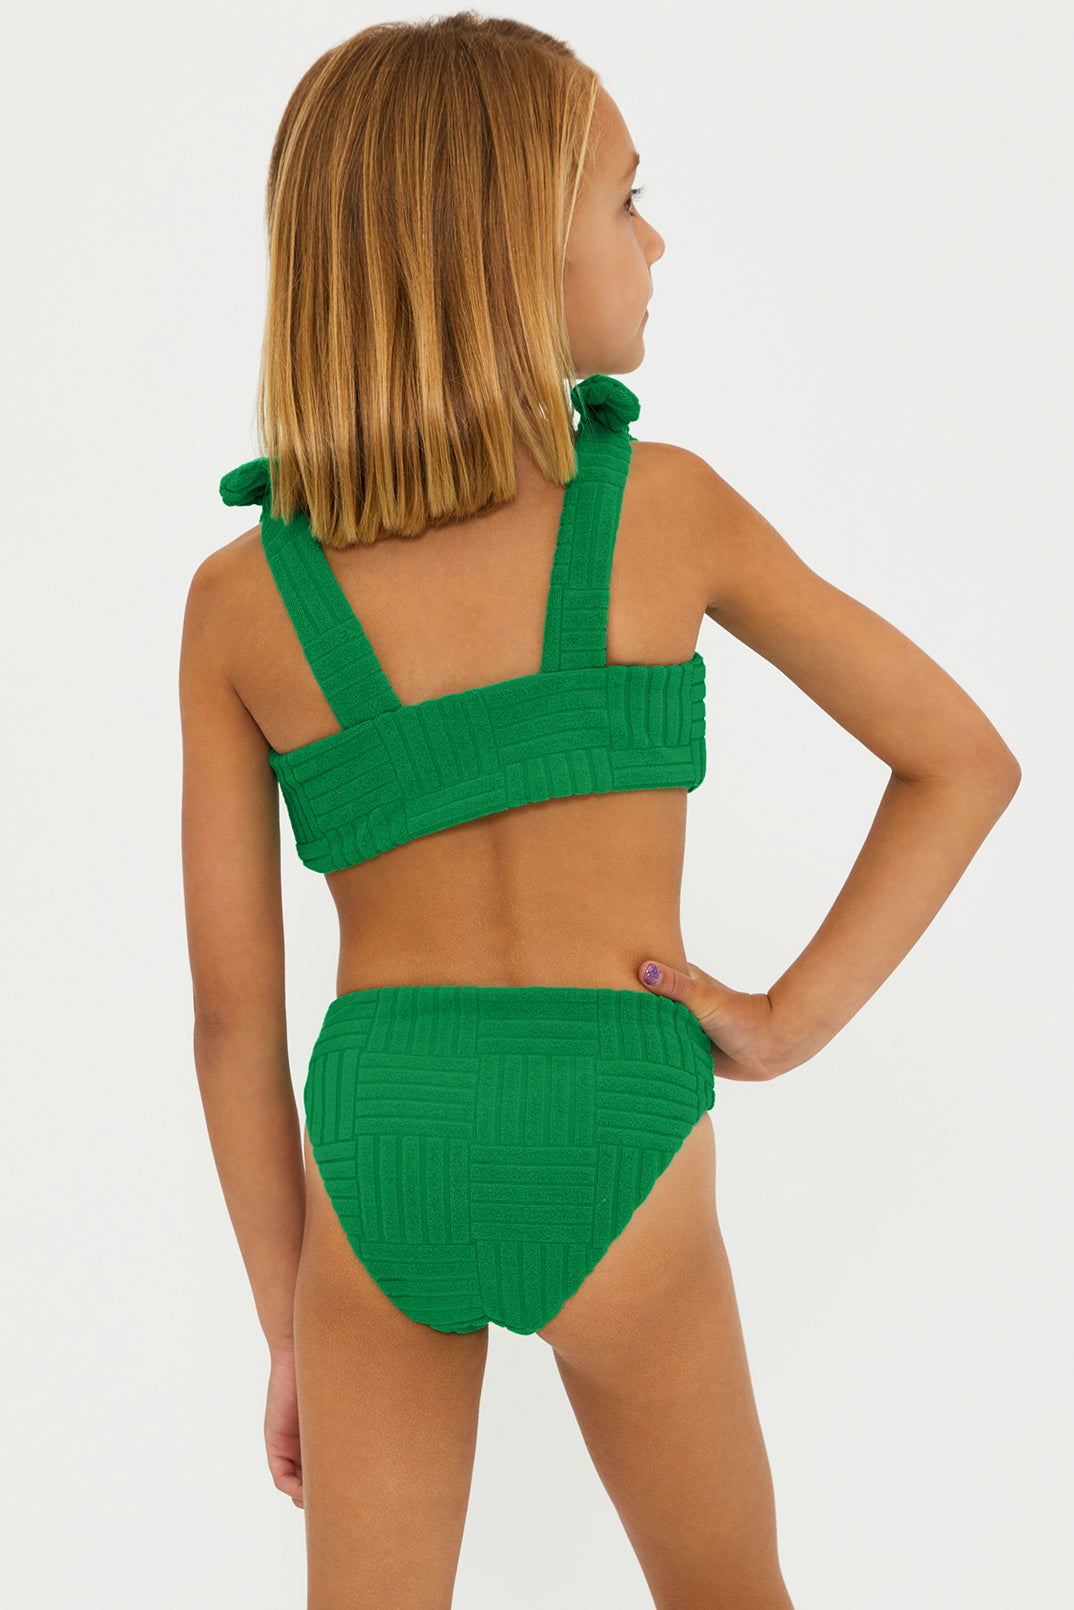 Little Stella Two Piece Jelly Bean Green Terry